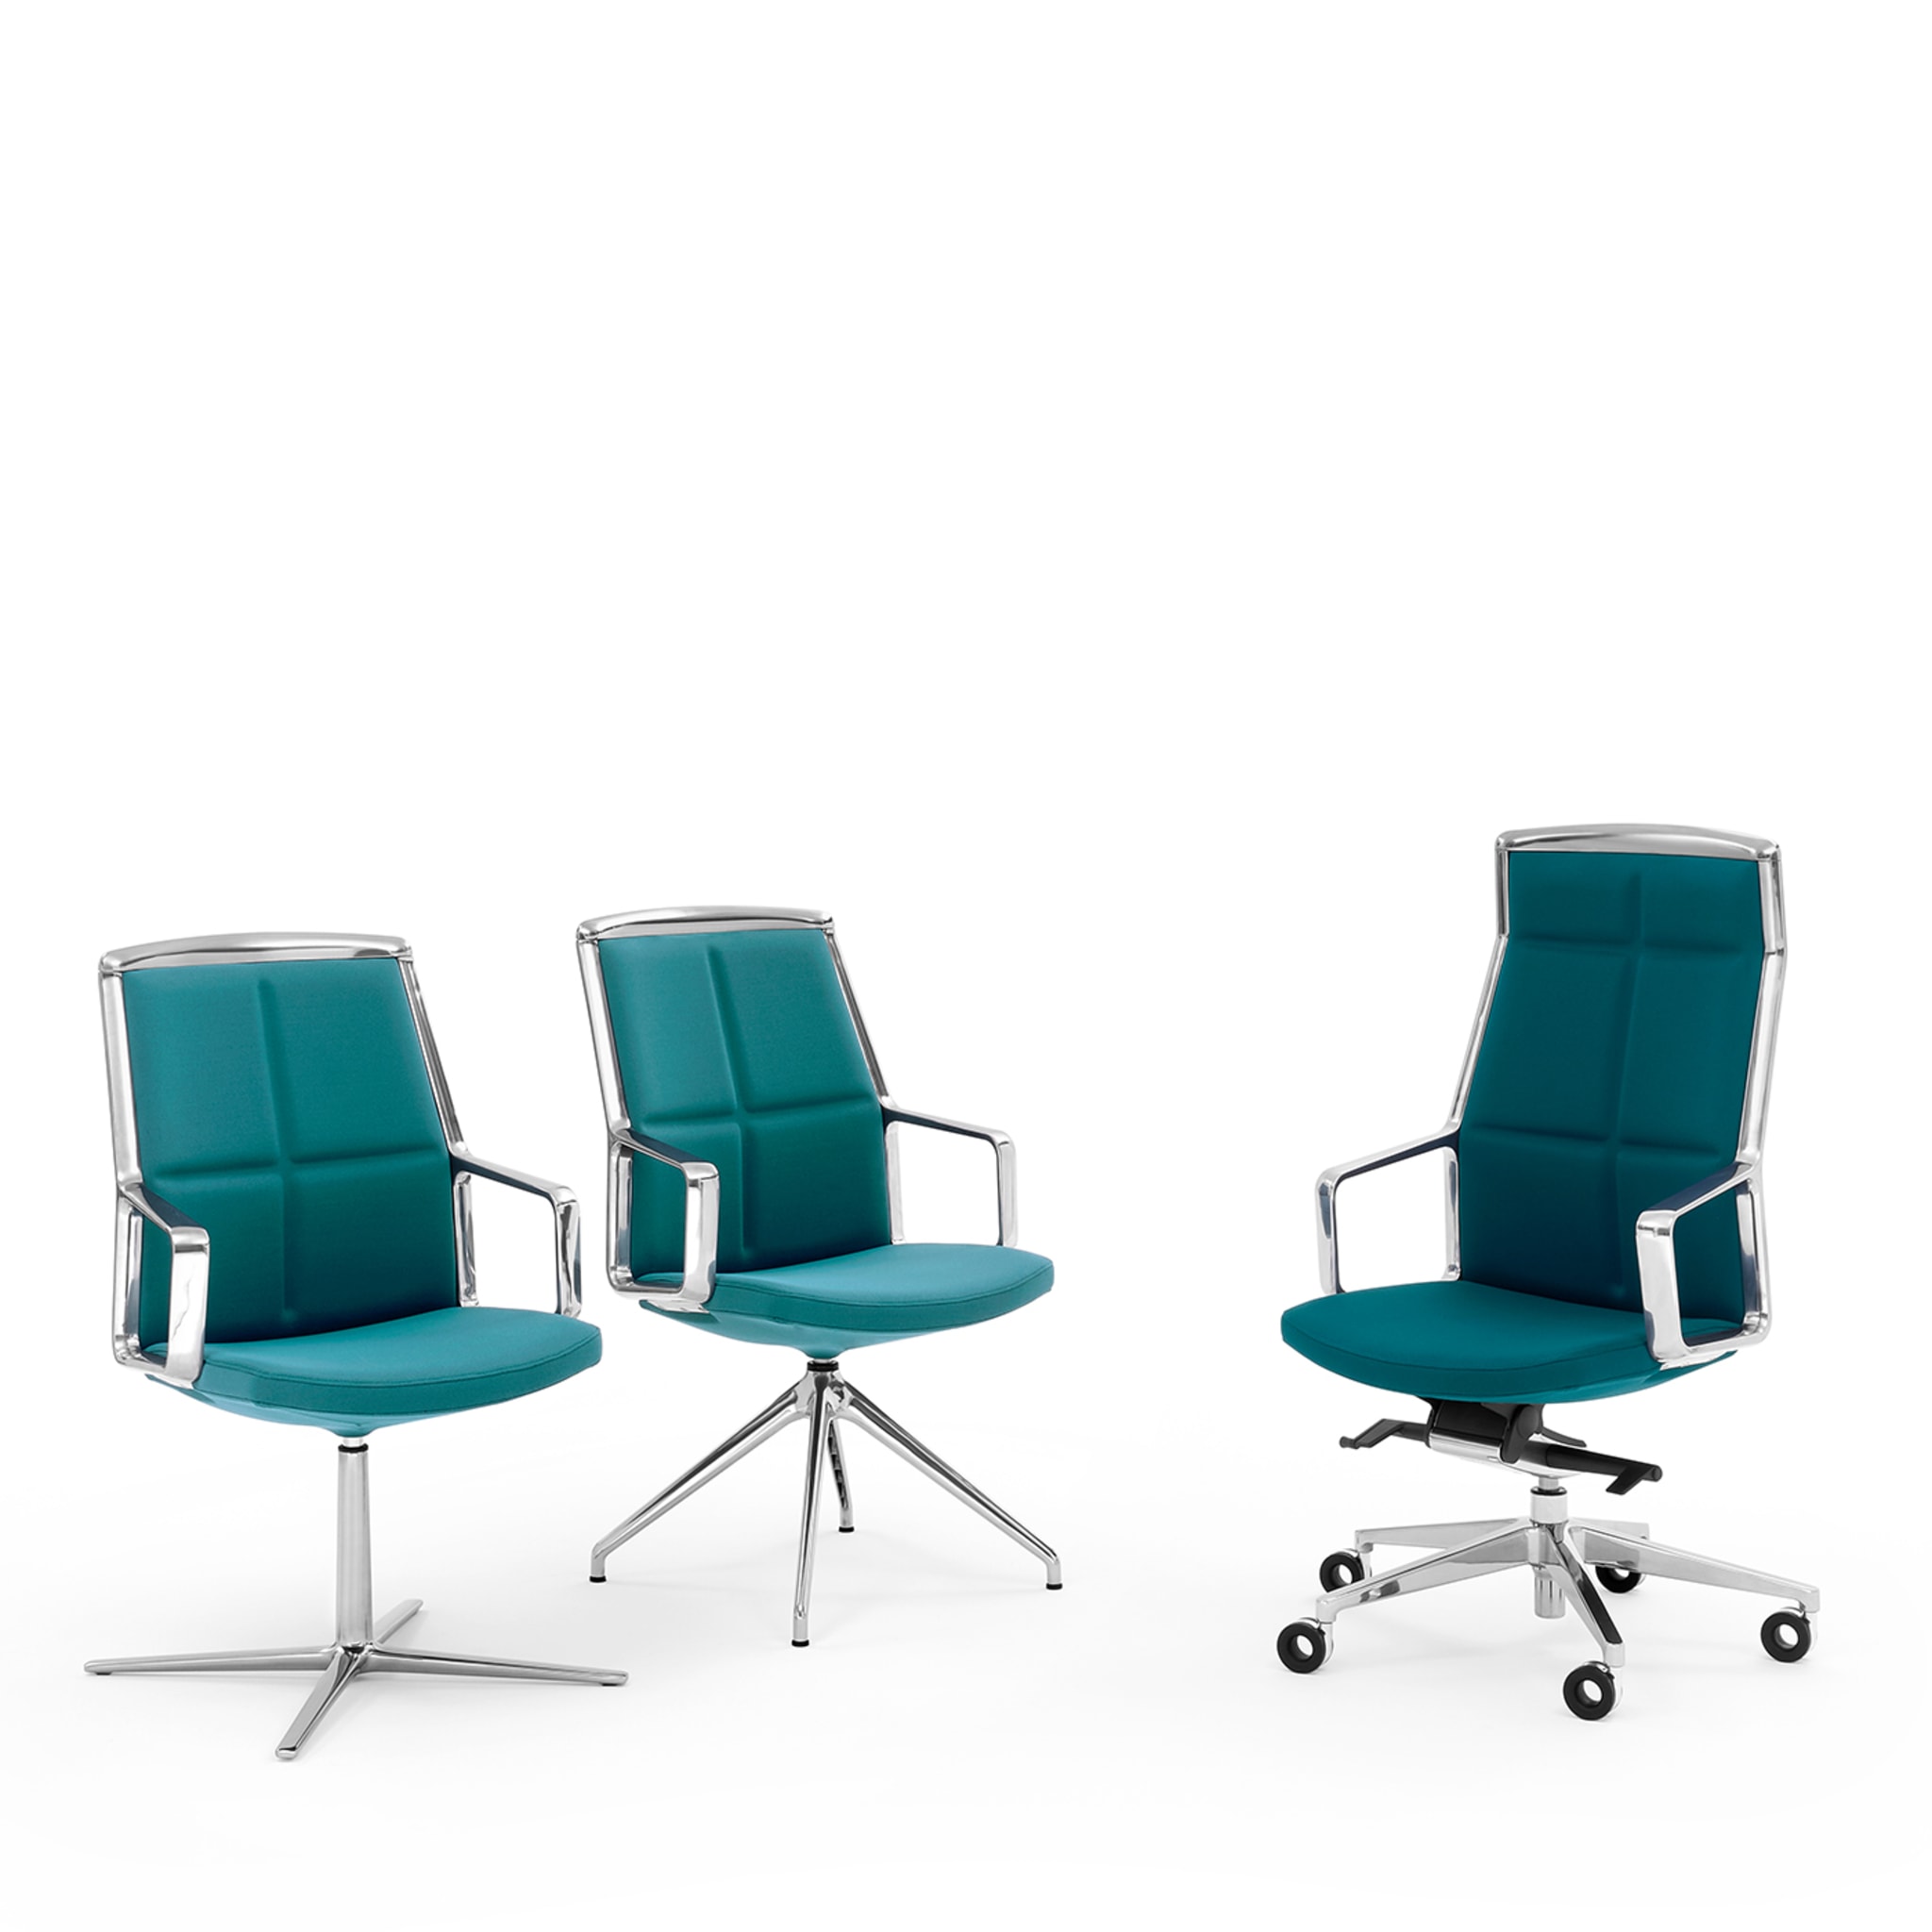 ADELE BLUE-GREEN MEETING CHAIR #1 by ORLANDINIDESIGN - Alternative view 2